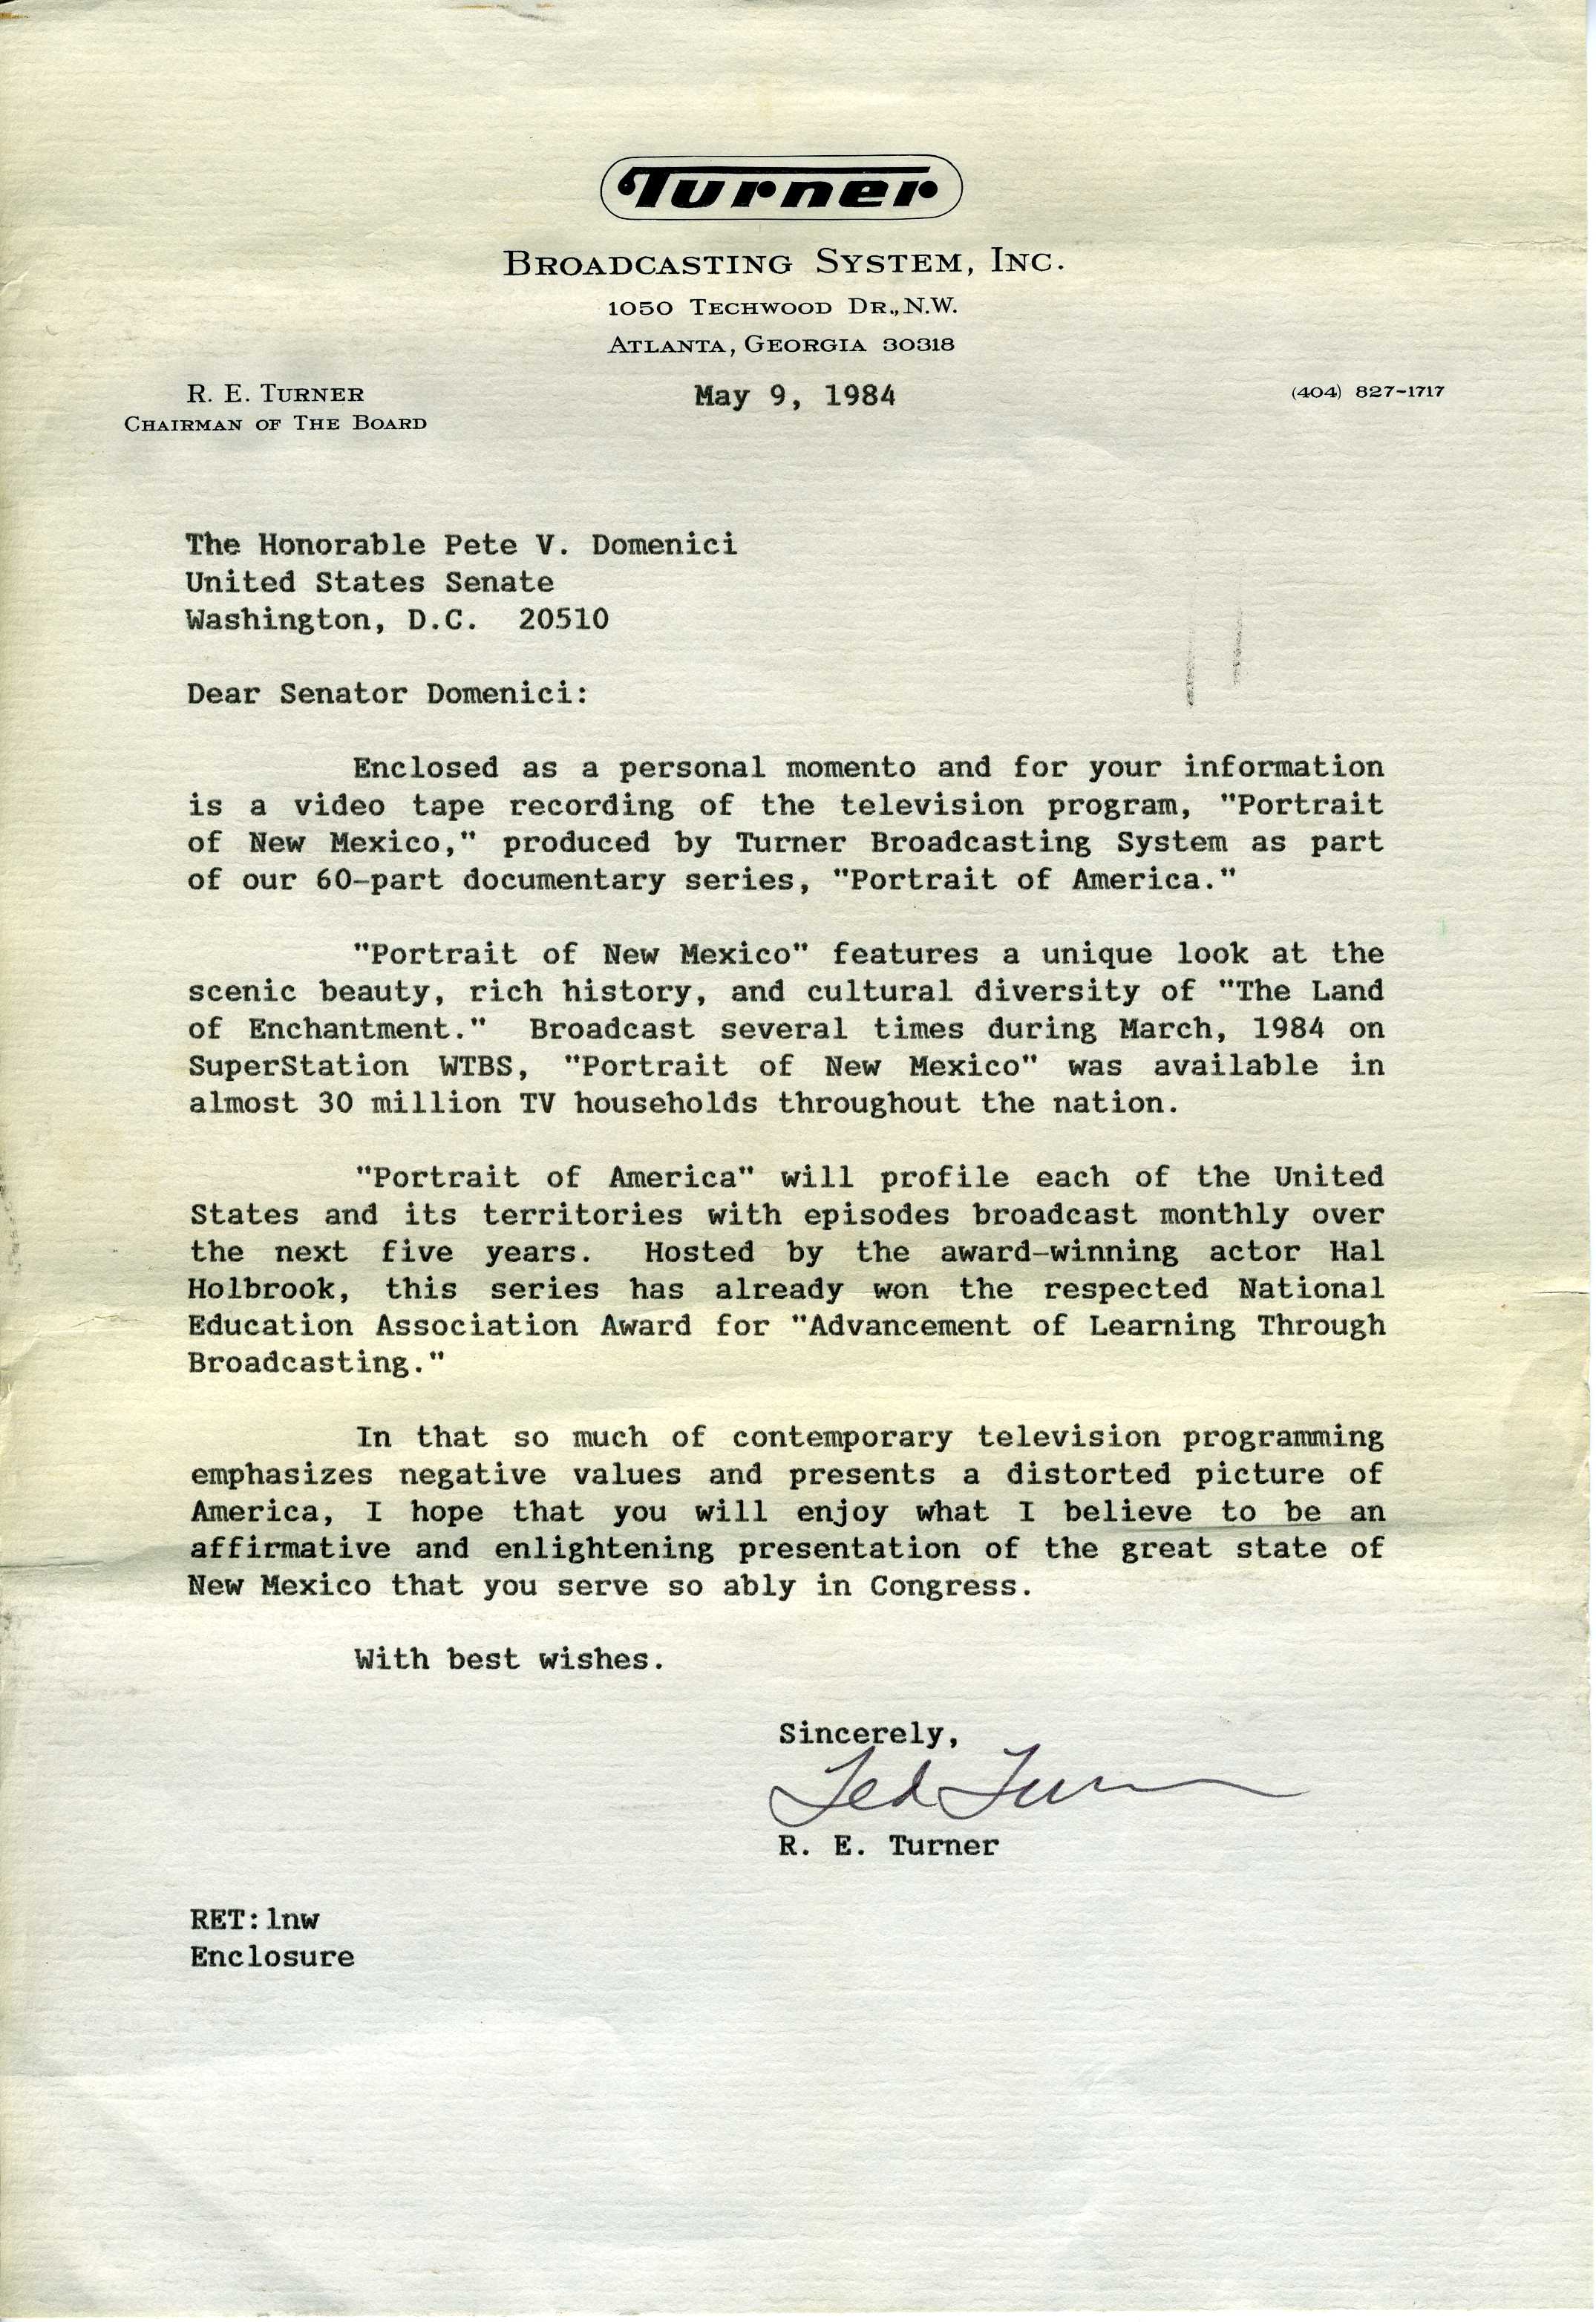 enlarged image of letter from Ted Turner to Domenici